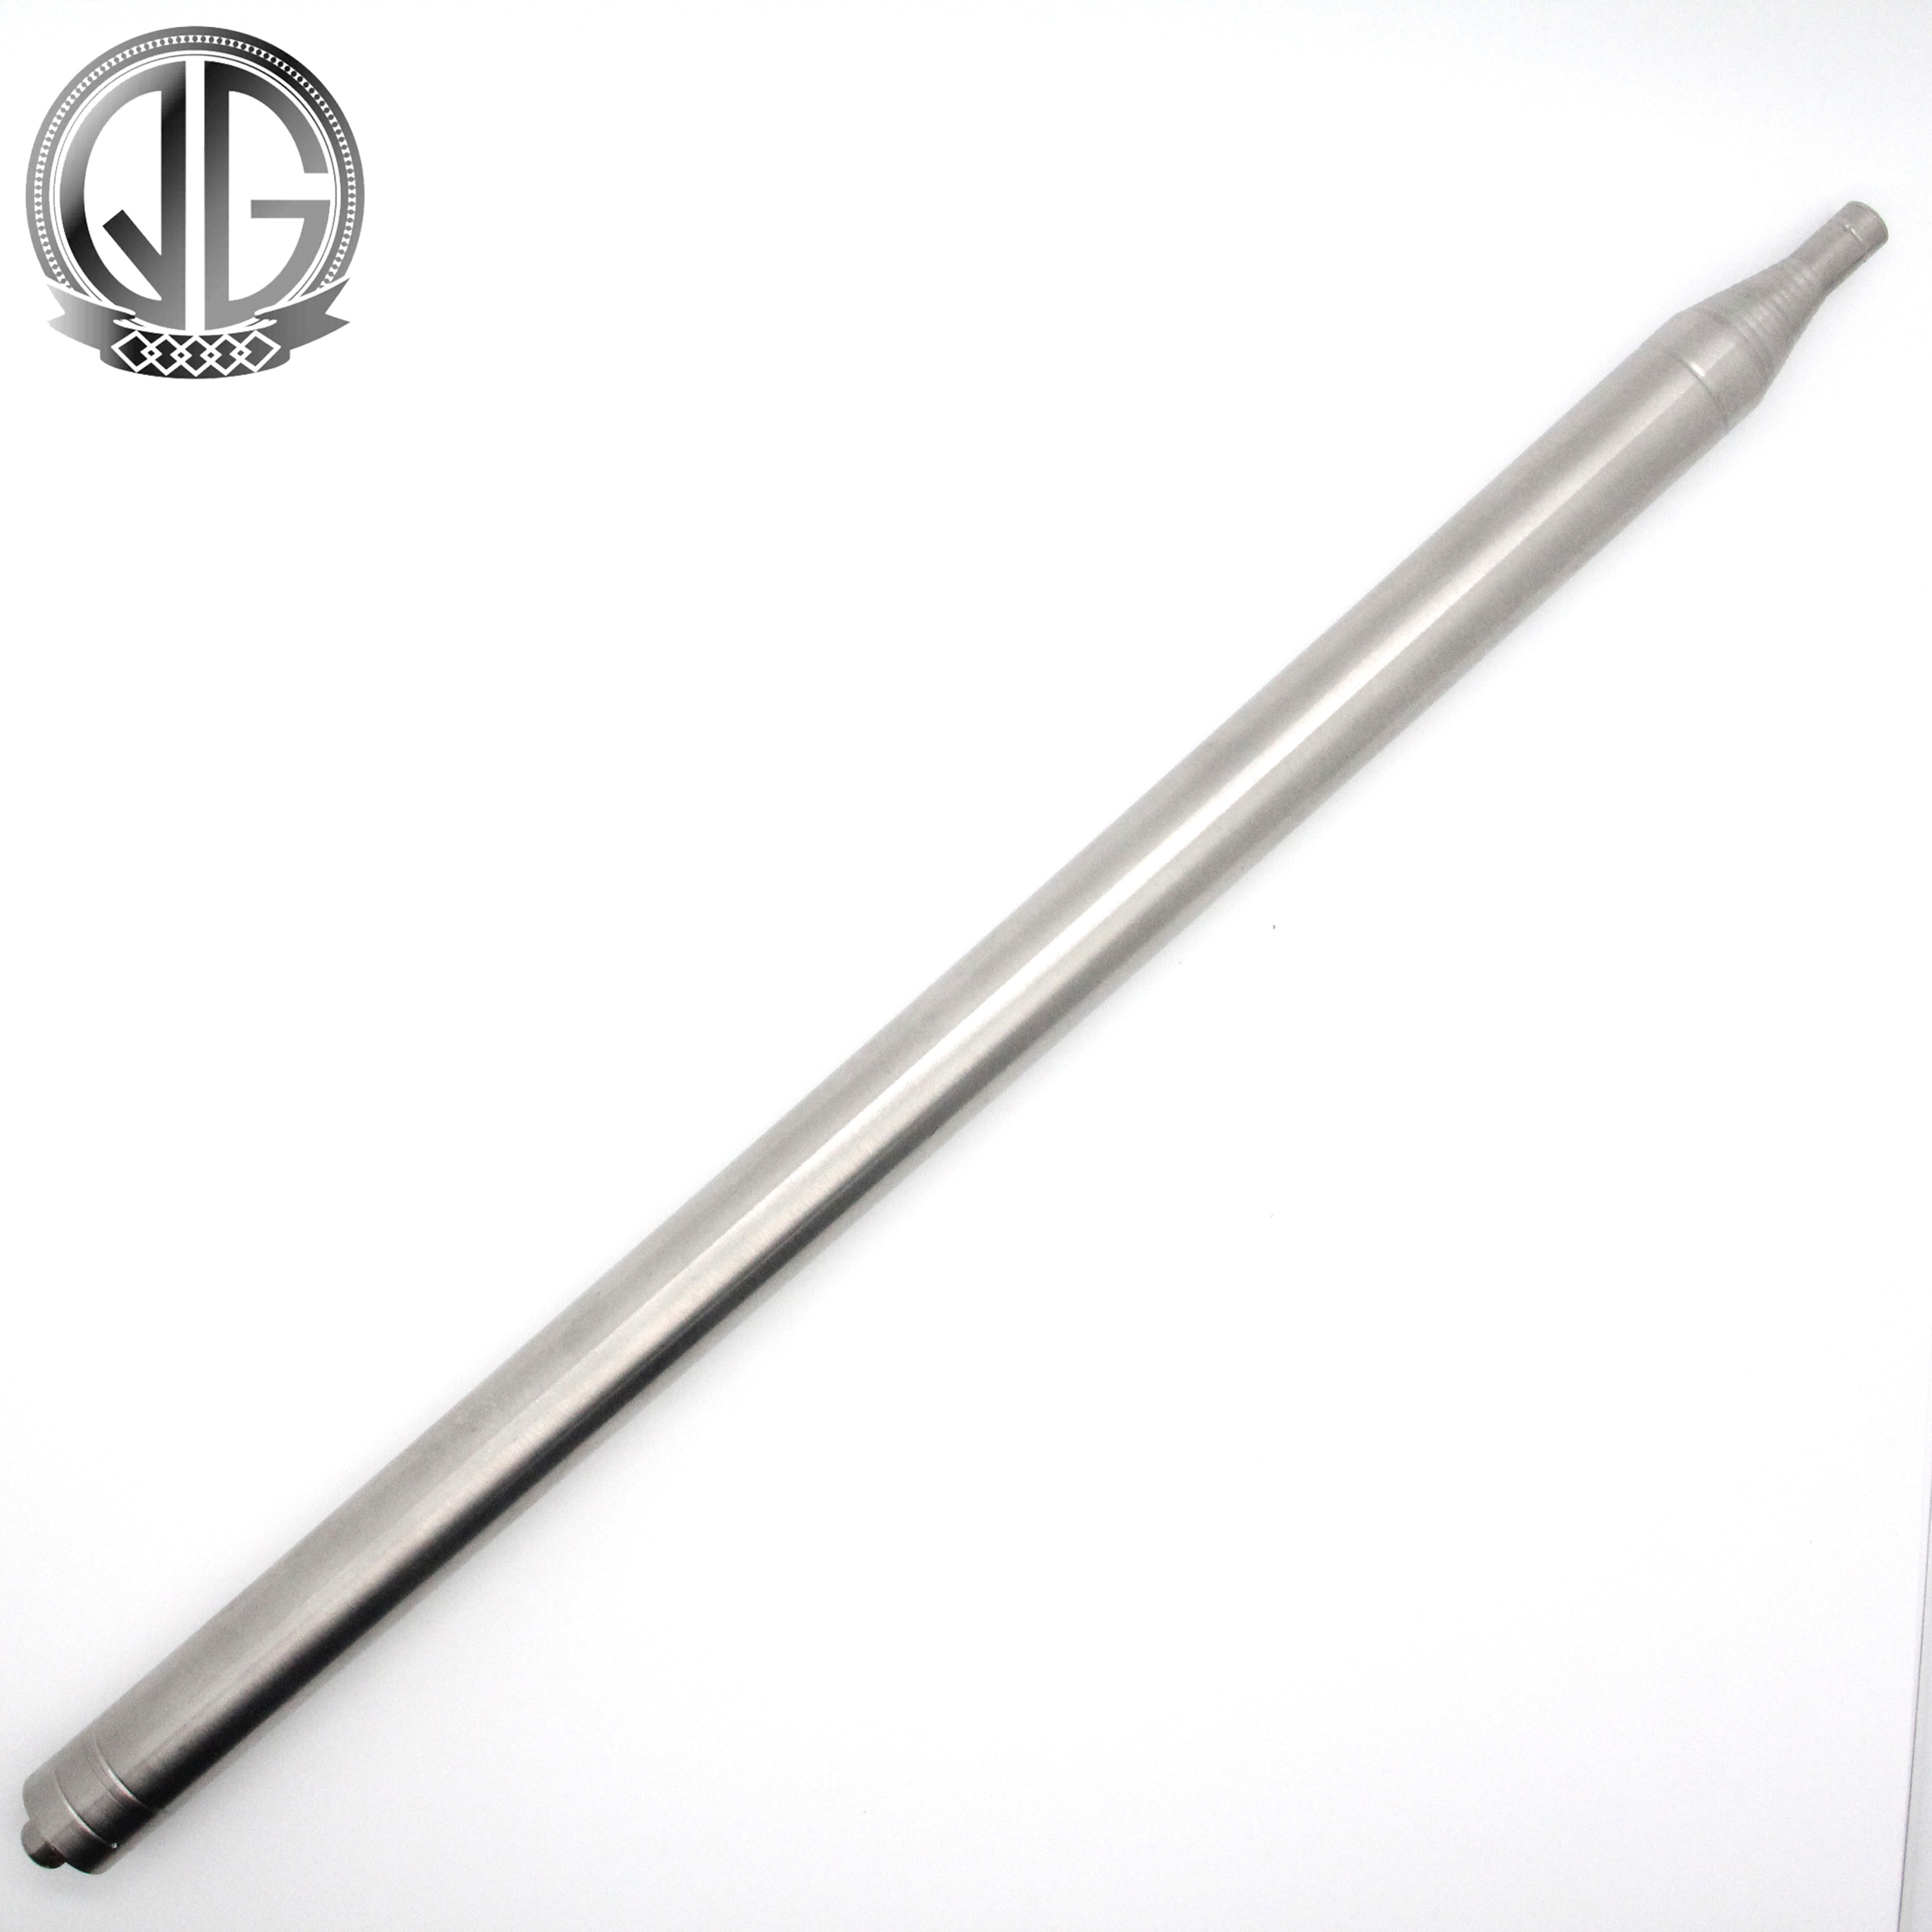 Customized Stainless Steel Telescopic Rod with Multi-Purpose Using Featured Image